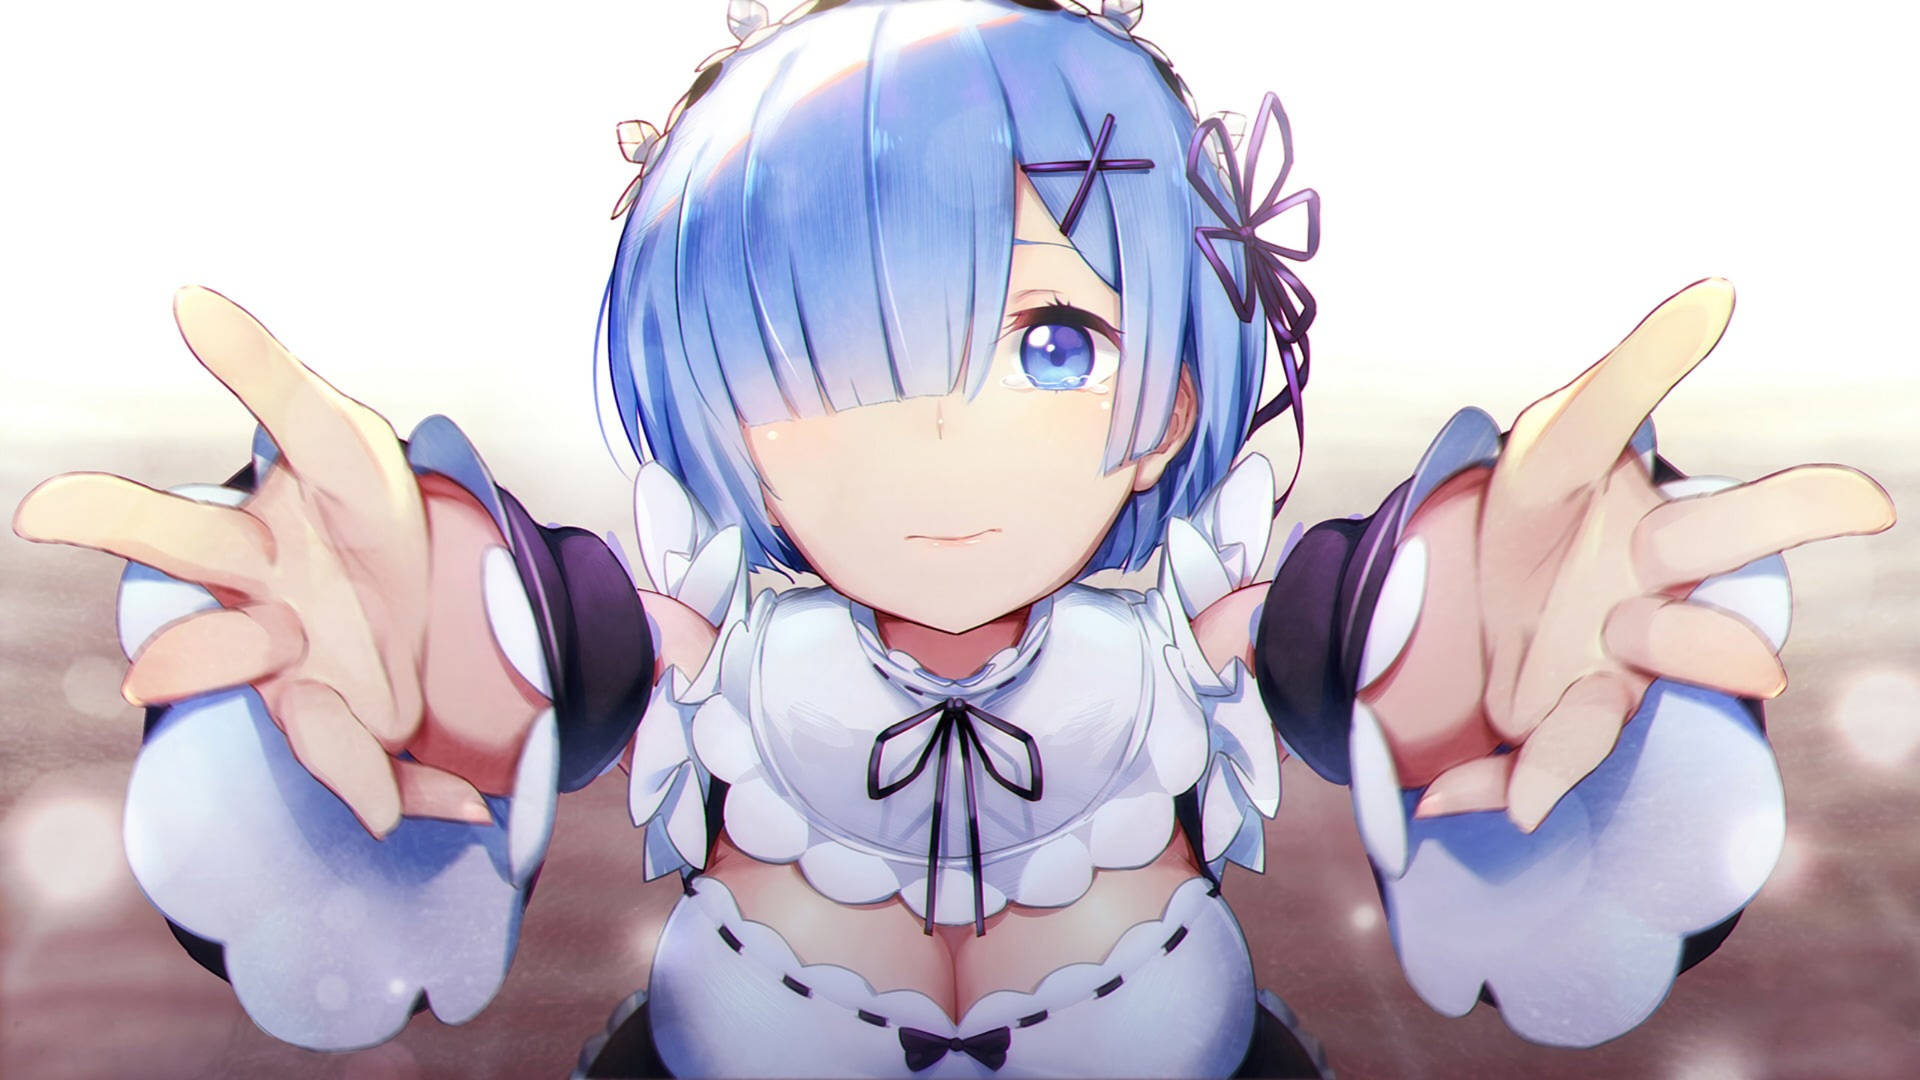 Anime Character Rem Offering a Warm Hug Wallpaper